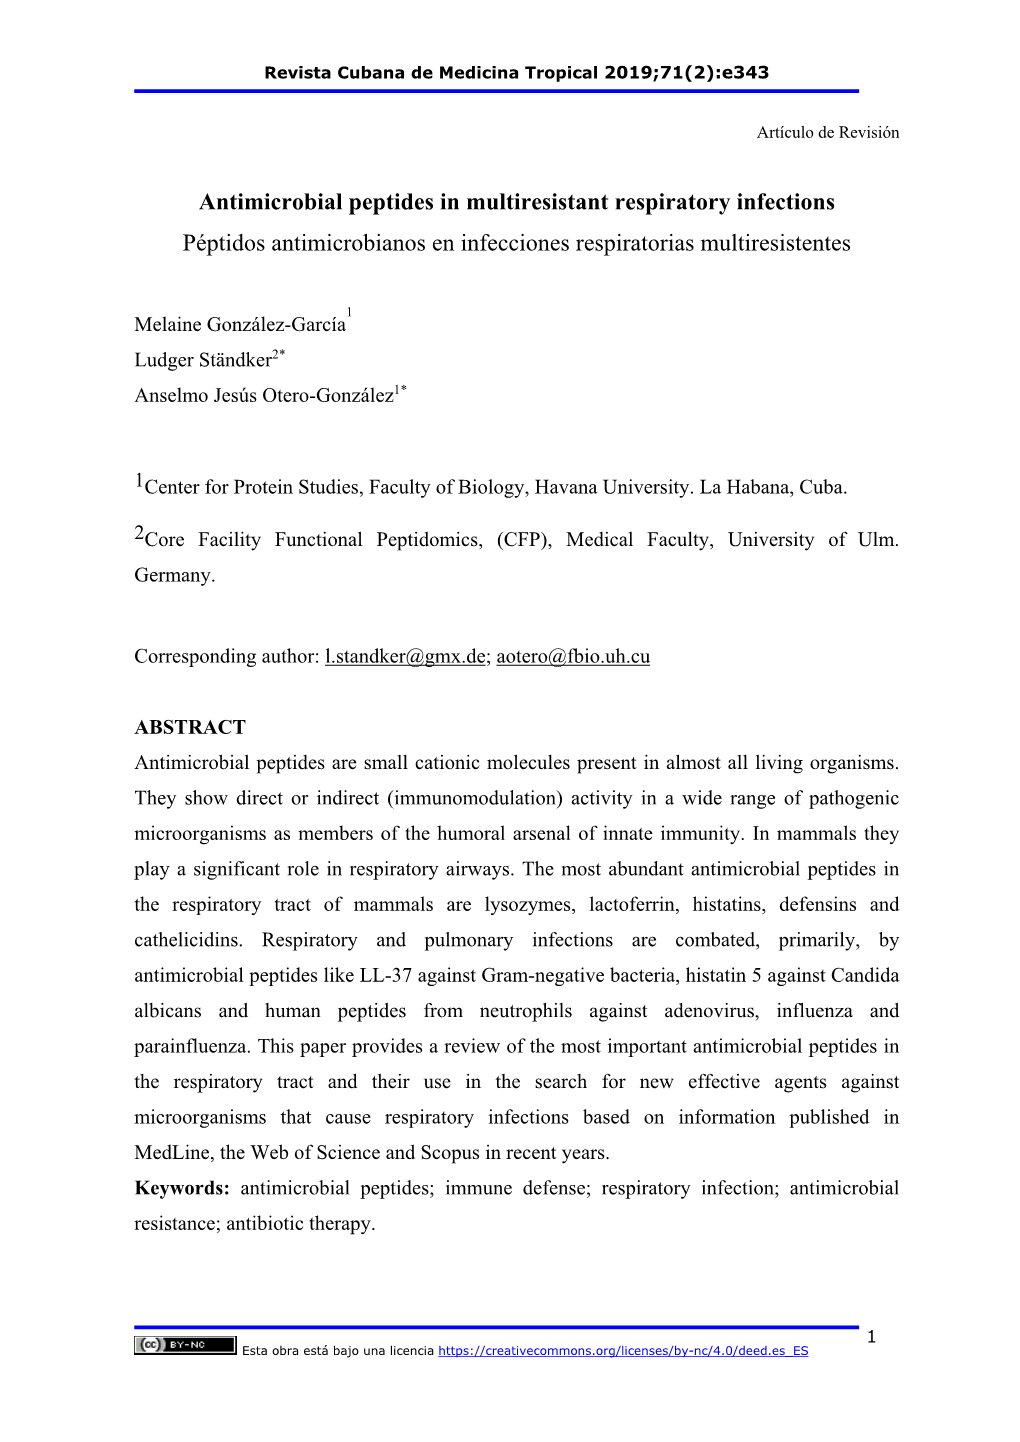 Antimicrobial Peptides in Multiresistant Respiratory Infections Péptidos Antimicrobianos En Infecciones Respiratorias Multiresistentes